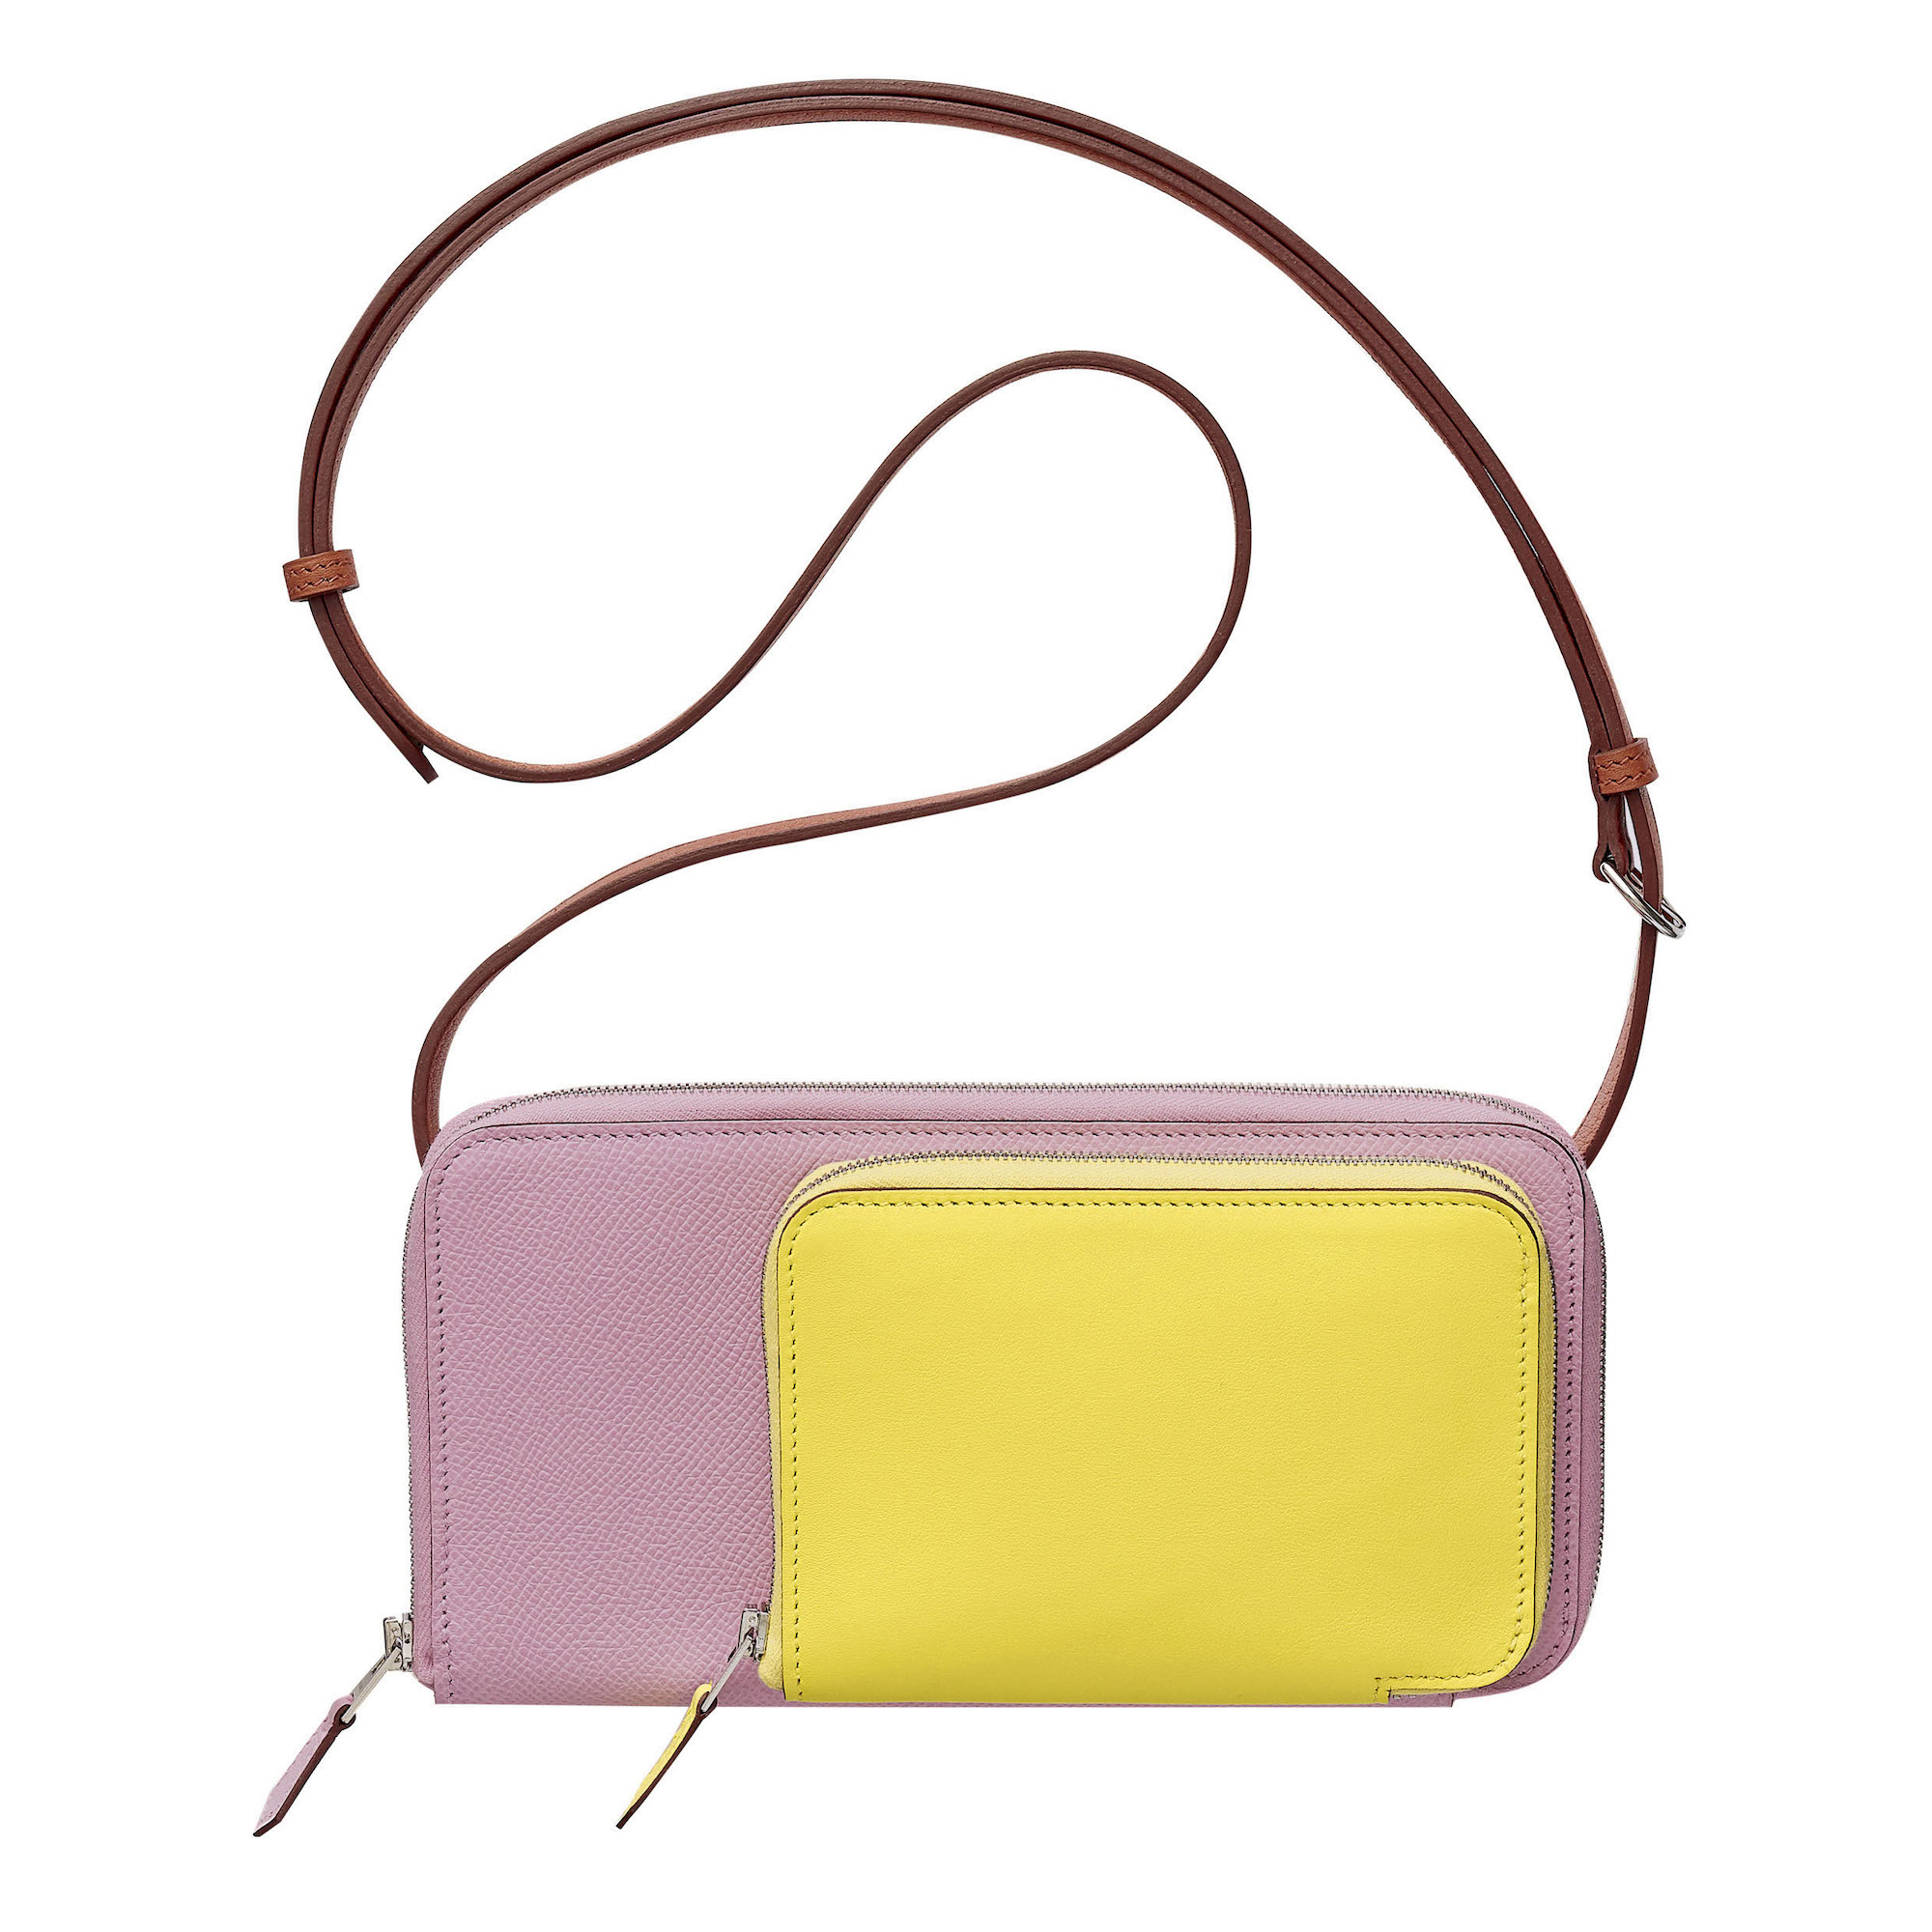 Hermès Spring/Summer 2022 Objets: A Colormatic Kelly Bag, And